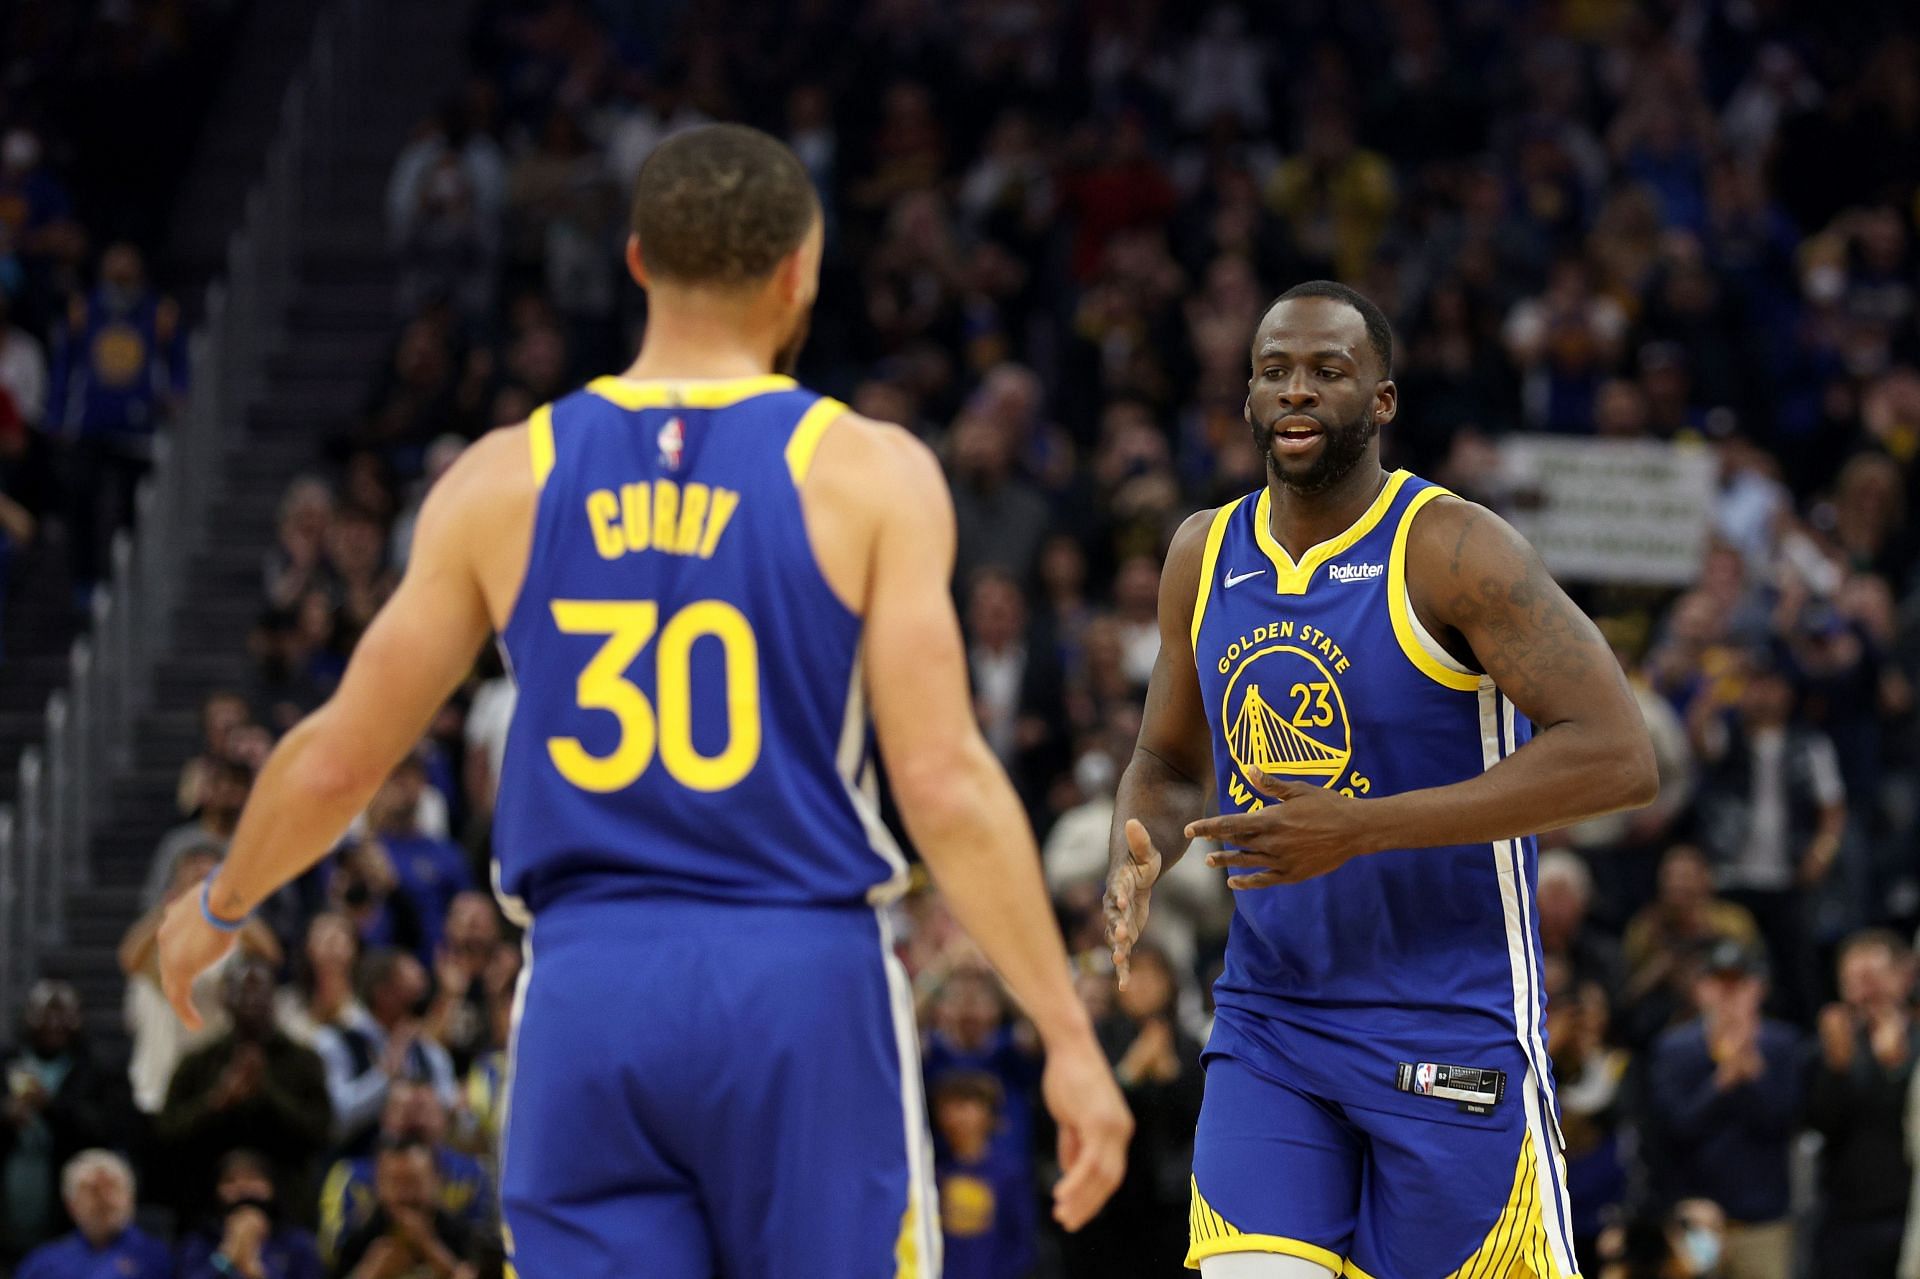 Draymond Green&#039;s superstar teammate Steph Curry also took to Twitter to react to this situation